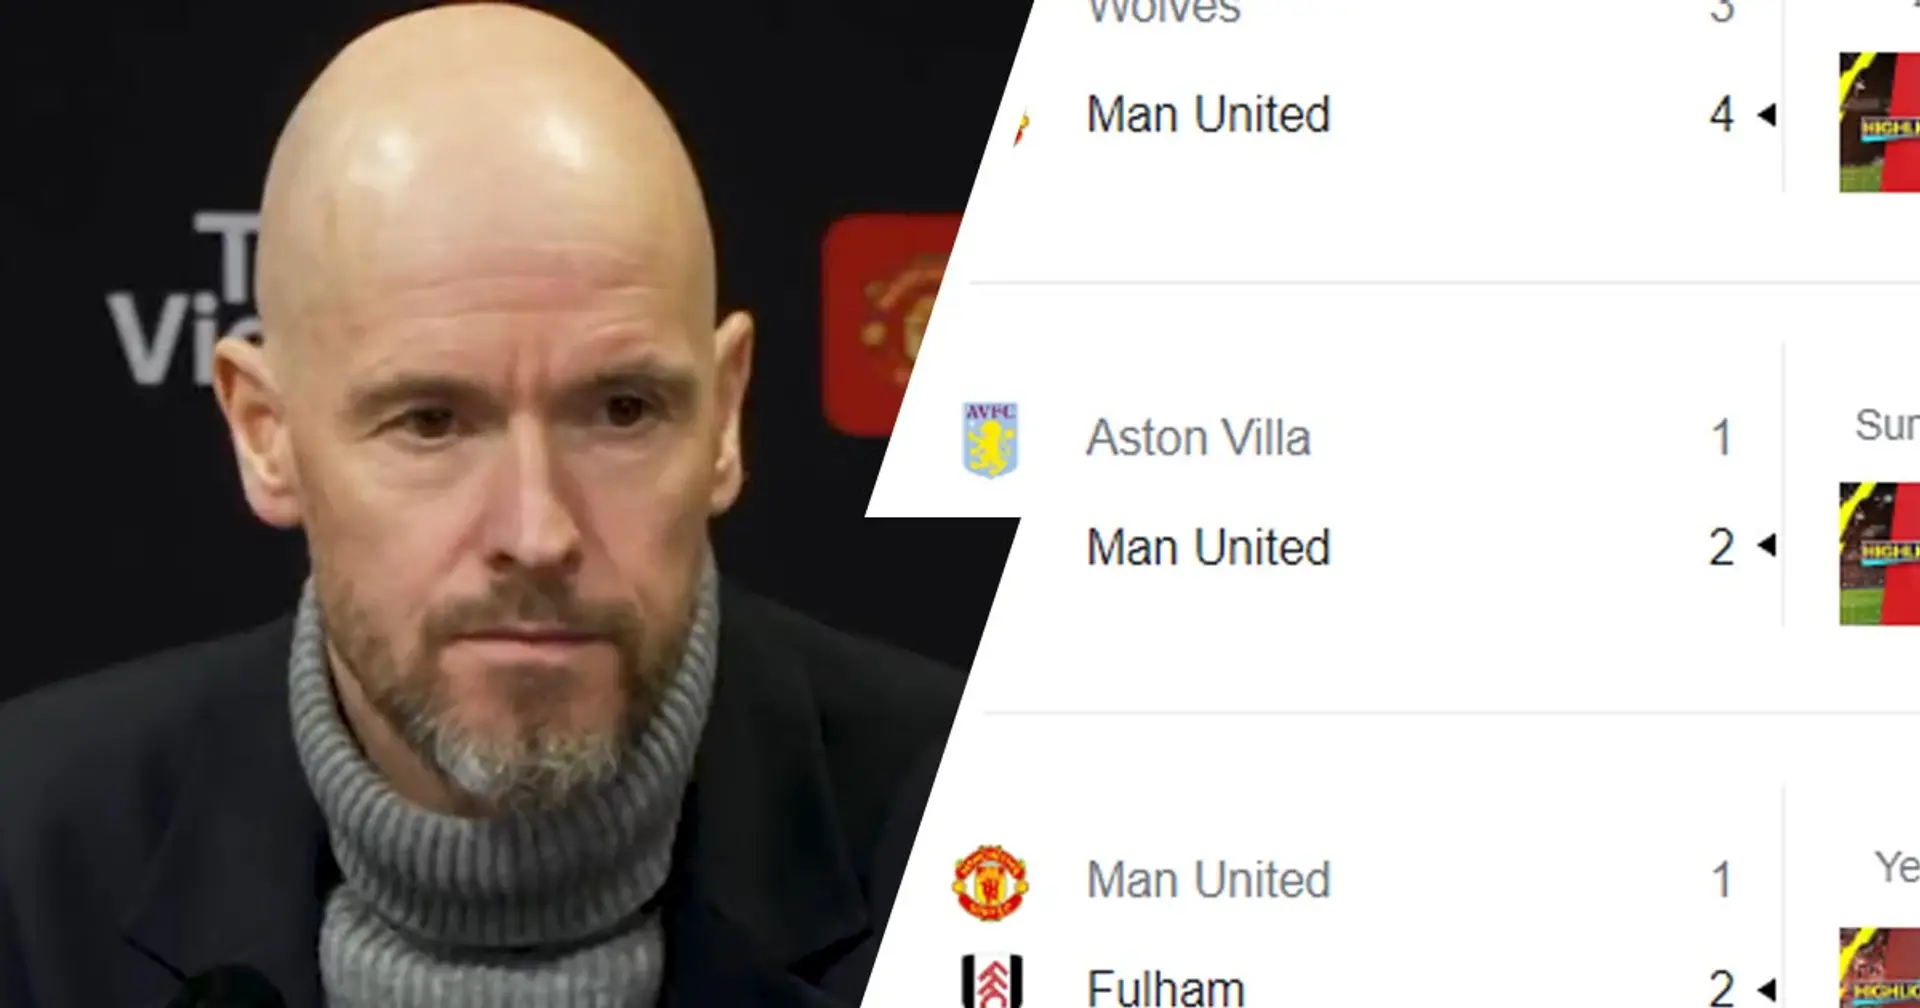 Ten Hag makes plea to Man United fans: ‘You have to see the bigger picture’